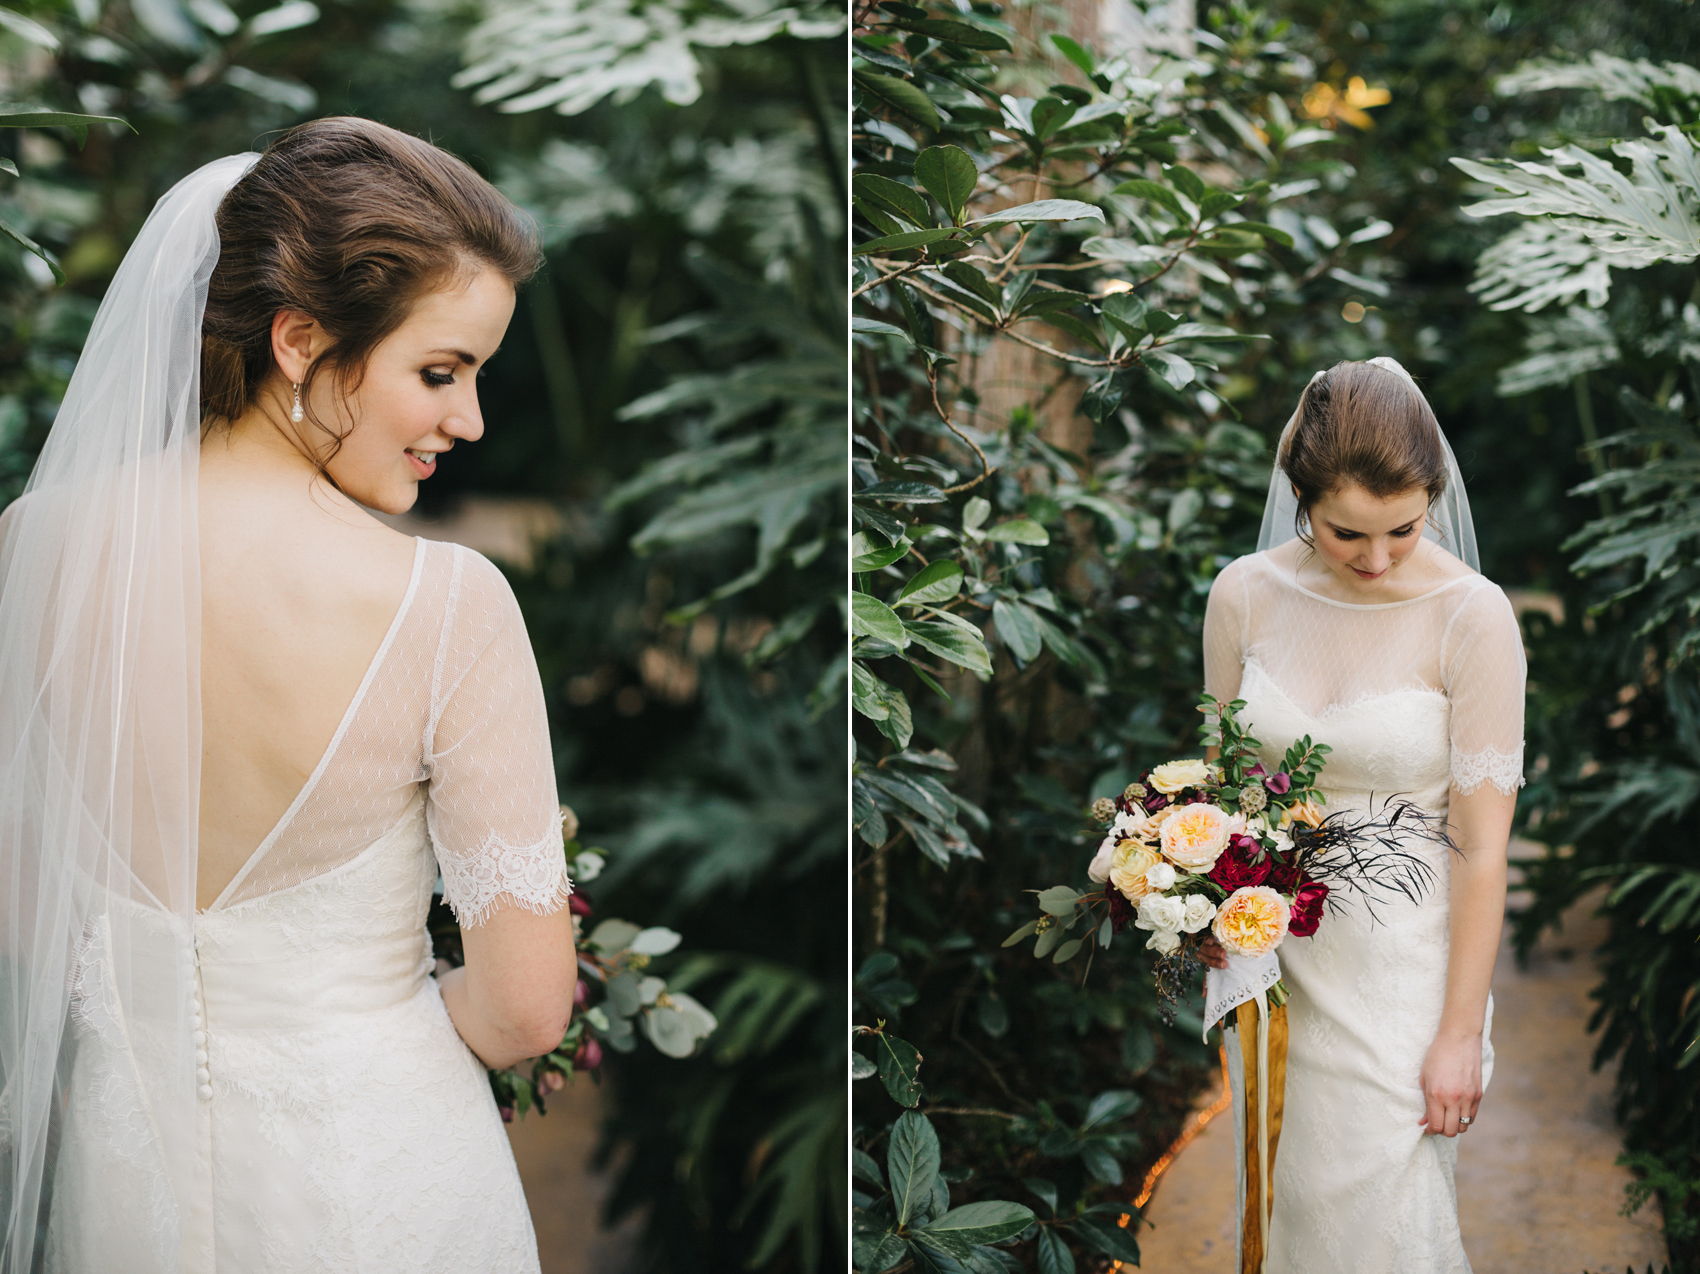 Bride wearing a gorgeous sleeved wedding dress and holding a lush boquuet of burgundy, peach, and gold peonies and garden roses